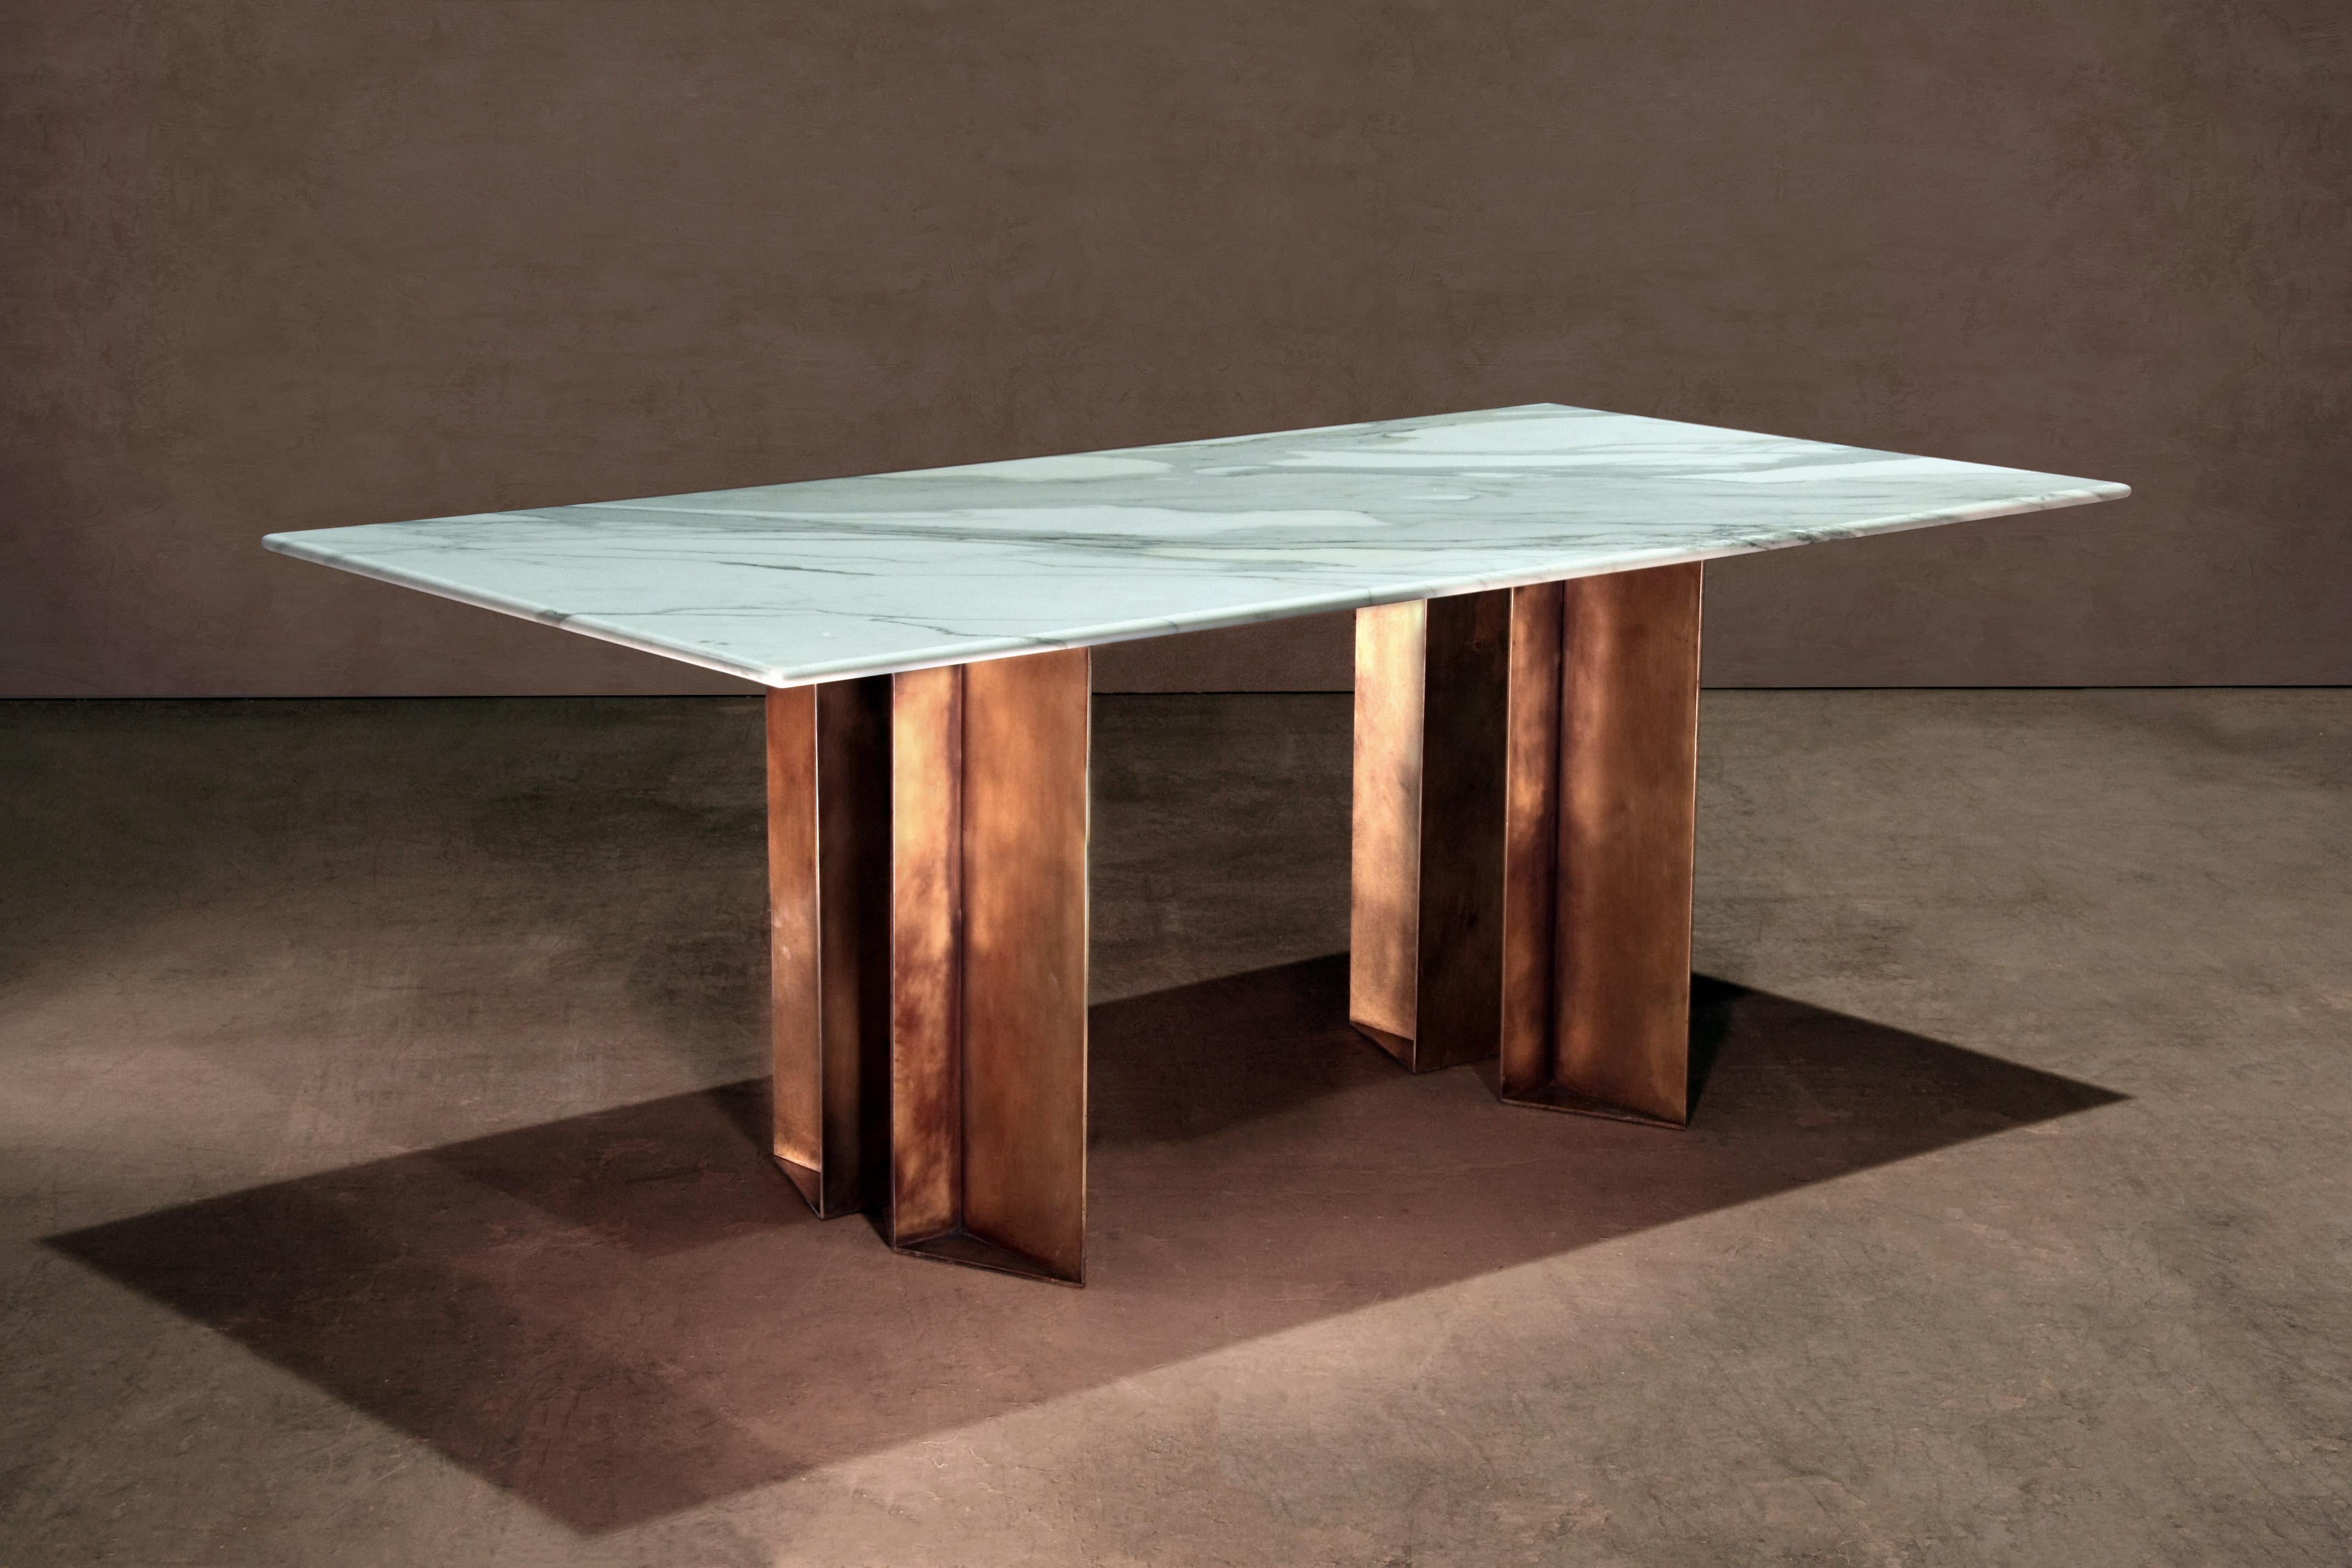 Dining table in Calacatta Bourghini and patinated brass. A collaboration between novocastrian and architecture and interior design studio Lind and Almond. Handcrafted in North East, England.

Measures: 200cm (length) x 100cm (depth) x 75cm (height).